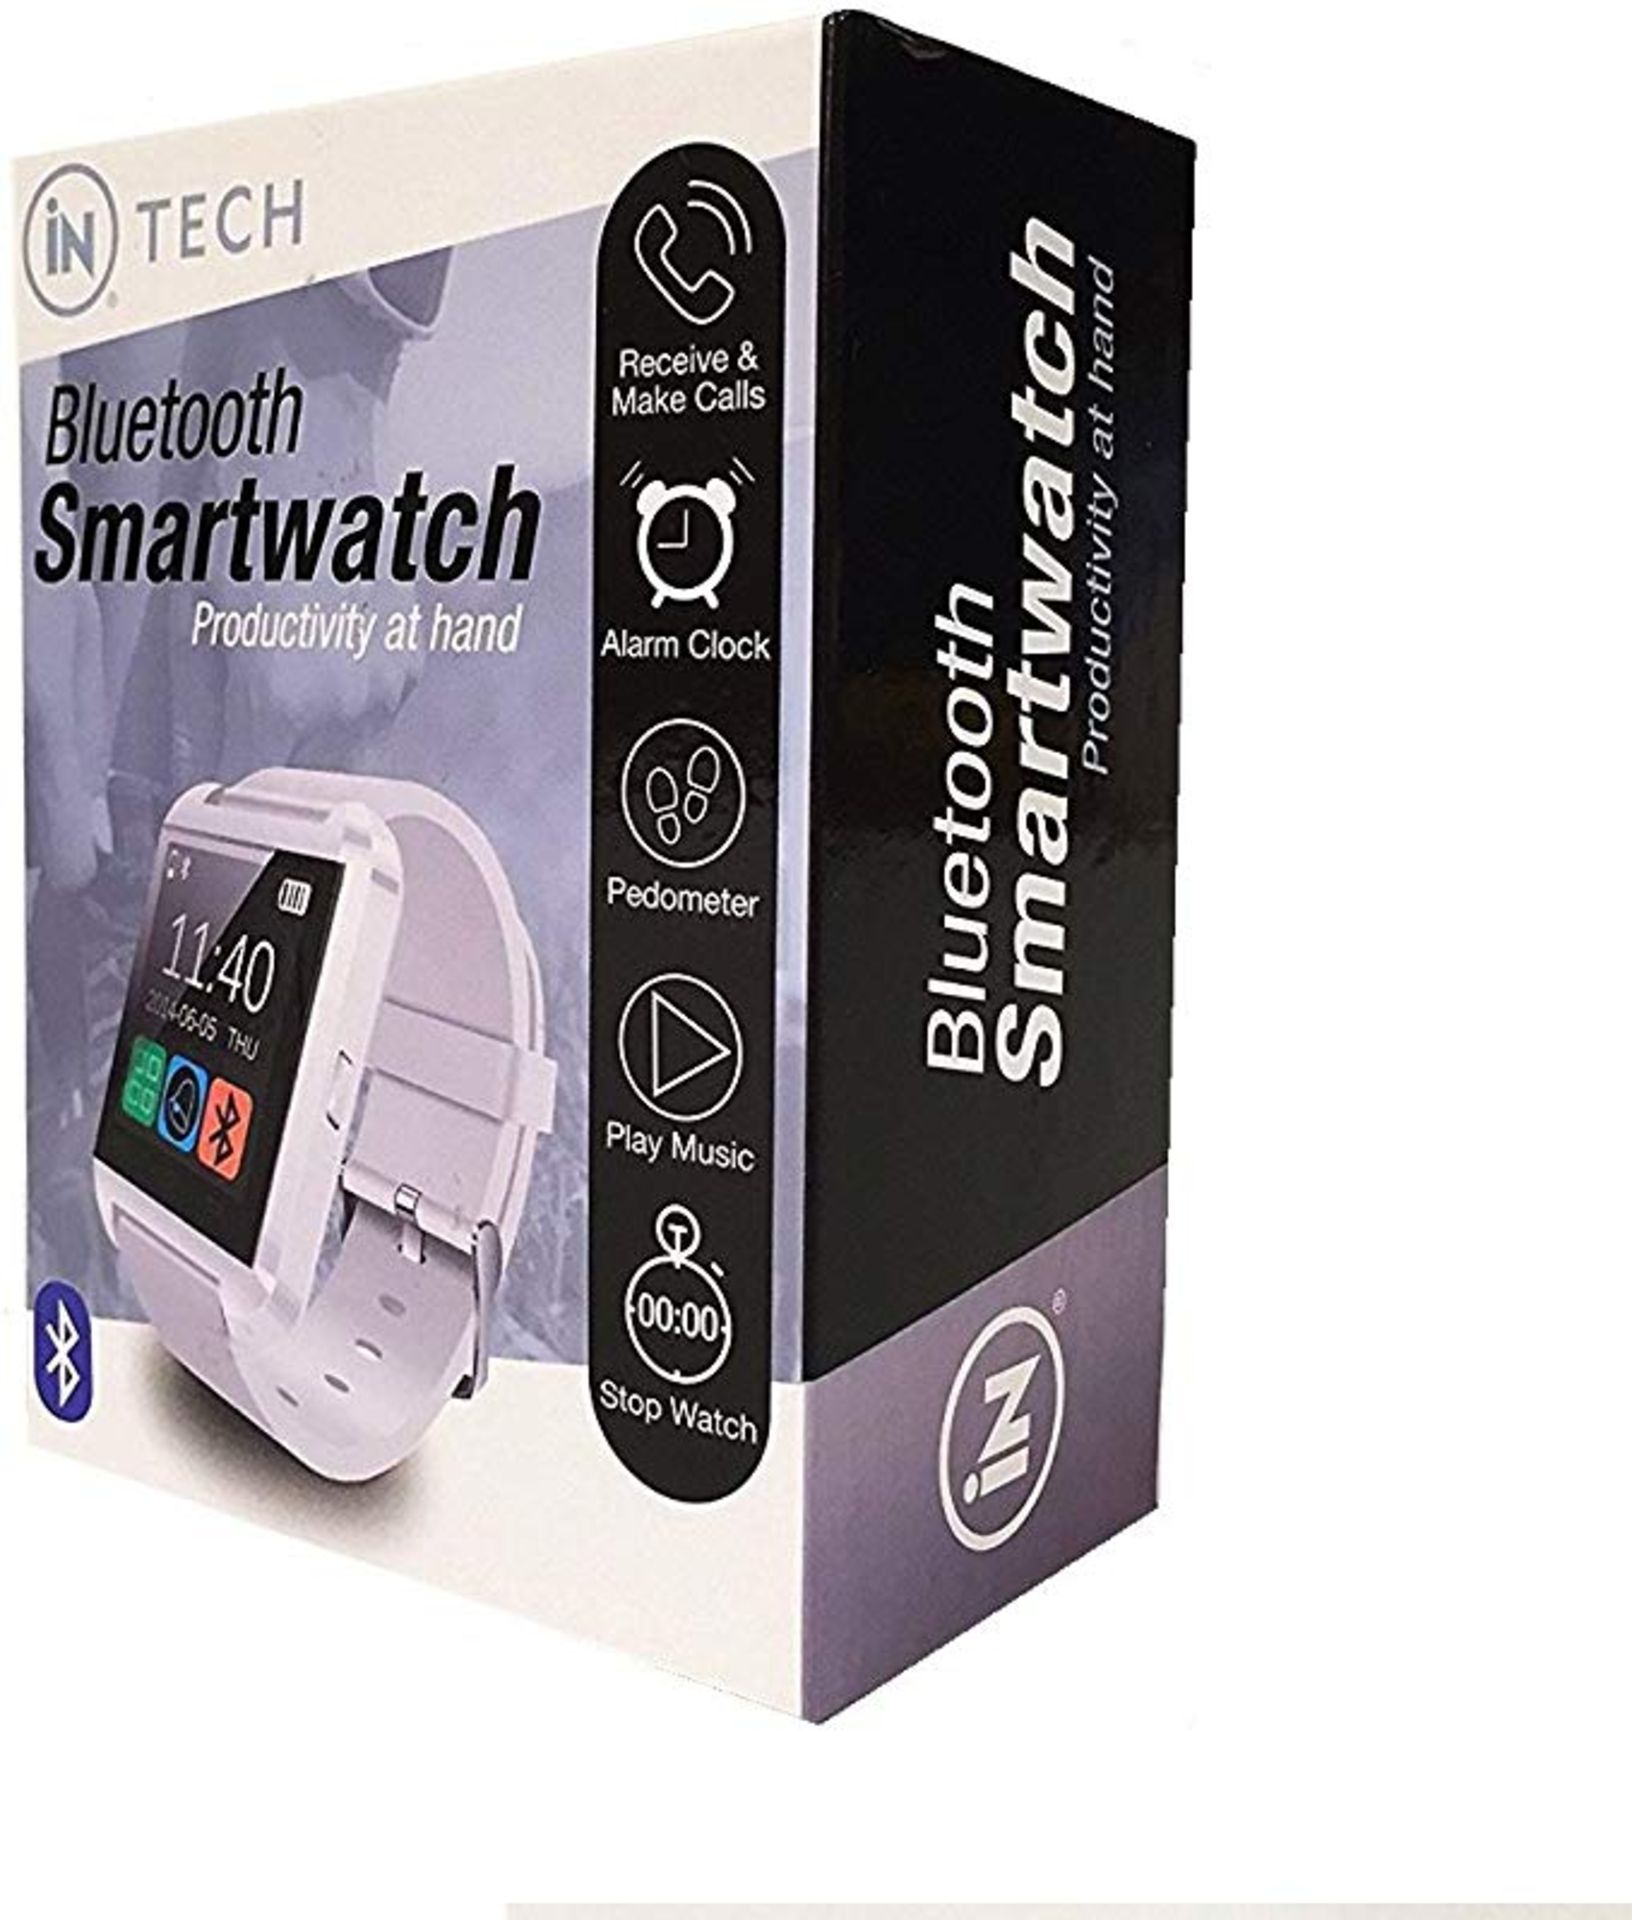 V Brand New In Tech Bluetooth Smart Watch - Receive and Make Calls - Alarm Clock - Pedometer - - Image 2 of 4